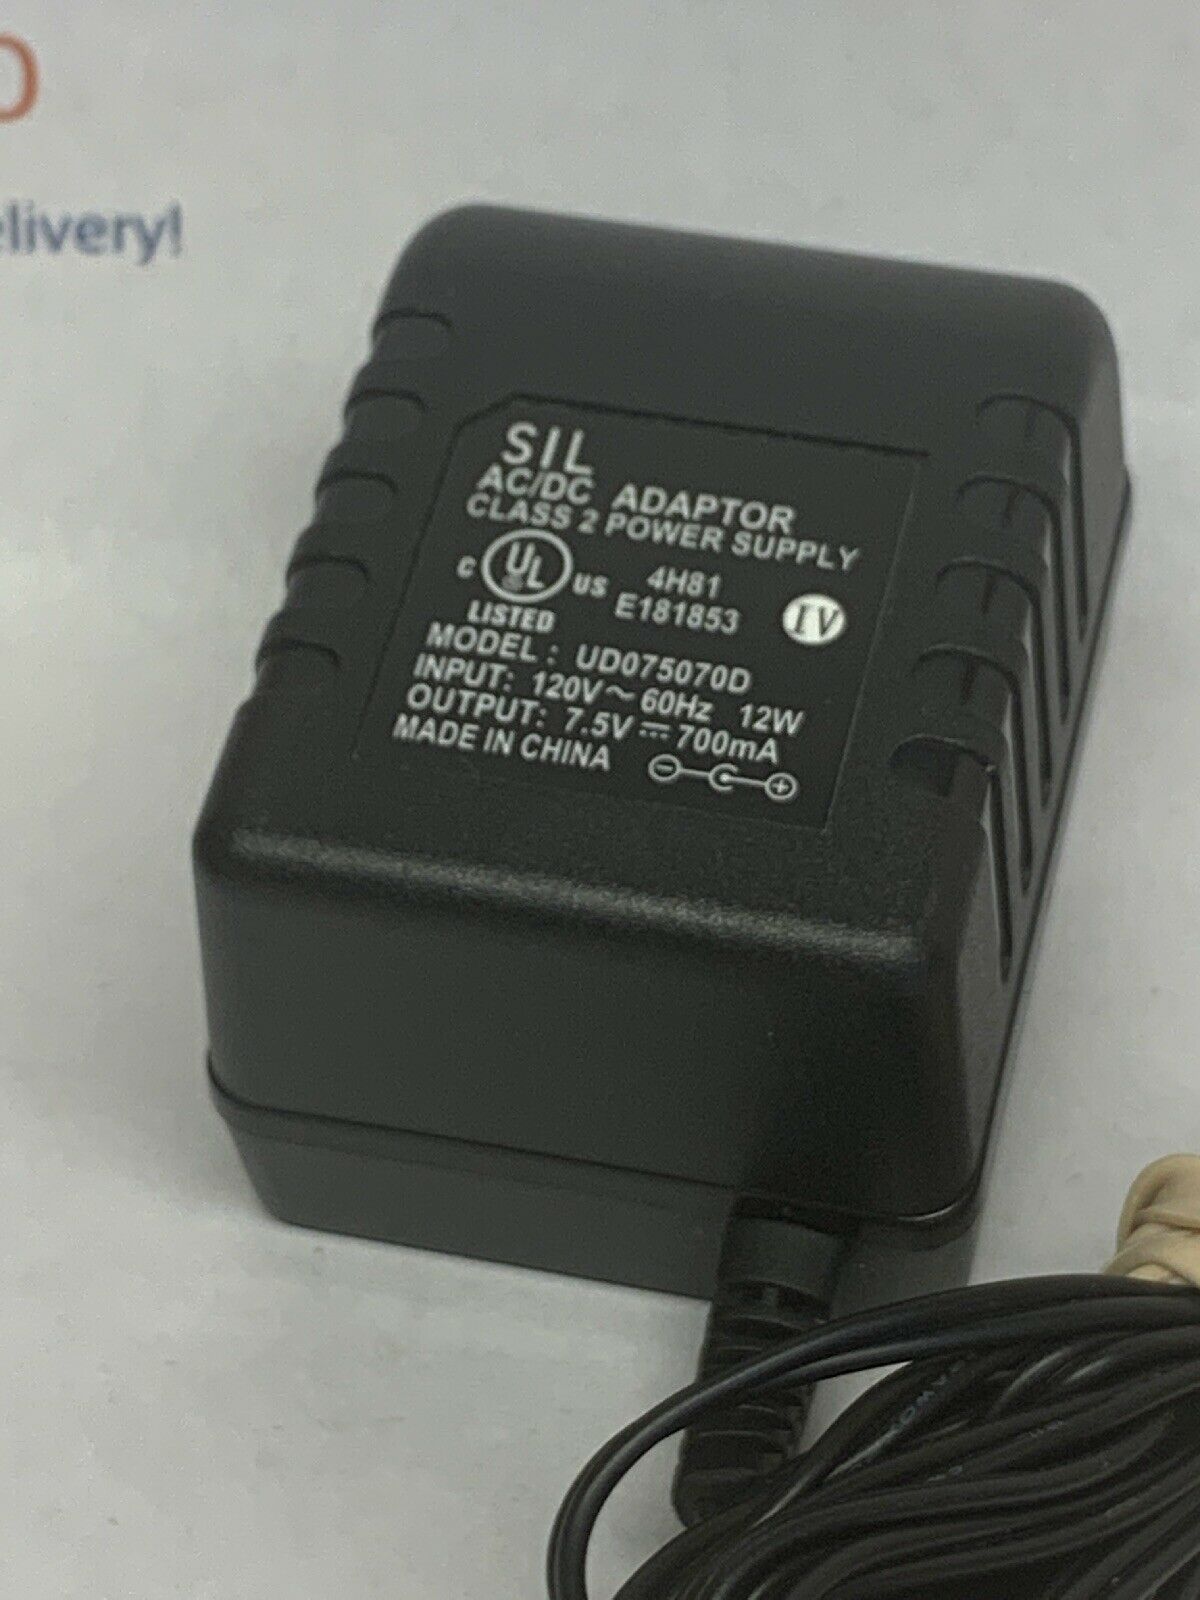 New 7.5V 700mA SIL UD075070D Class 2 Transformer Power Supply Ac Adapter